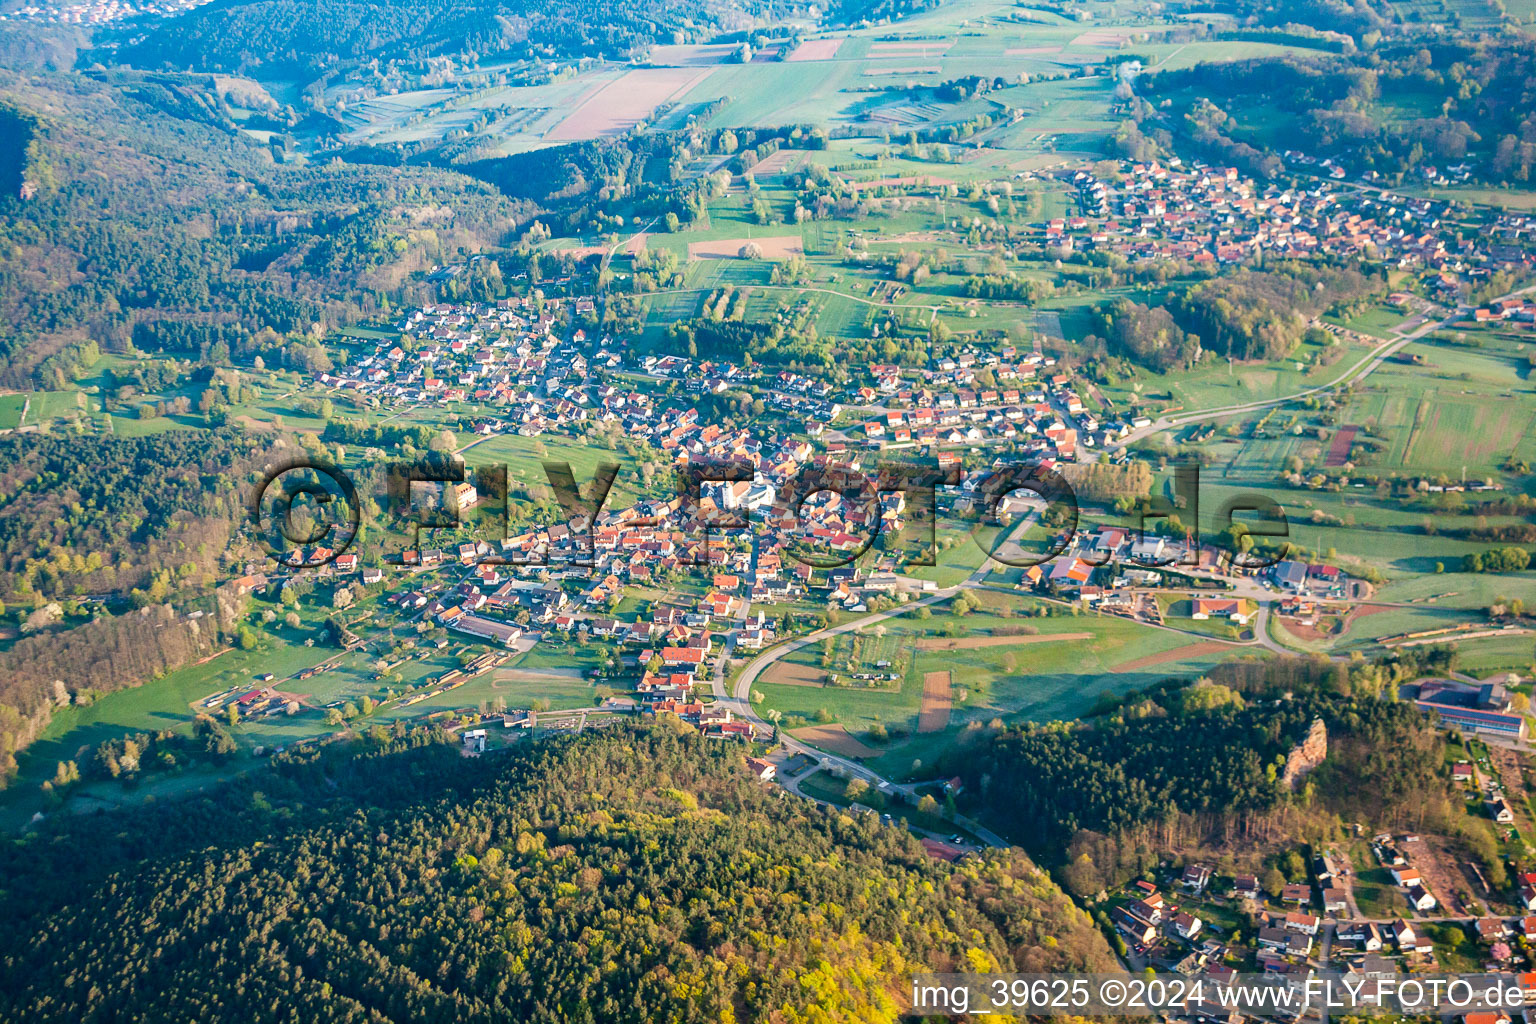 From the southwest in the district Gossersweiler in Gossersweiler-Stein in the state Rhineland-Palatinate, Germany